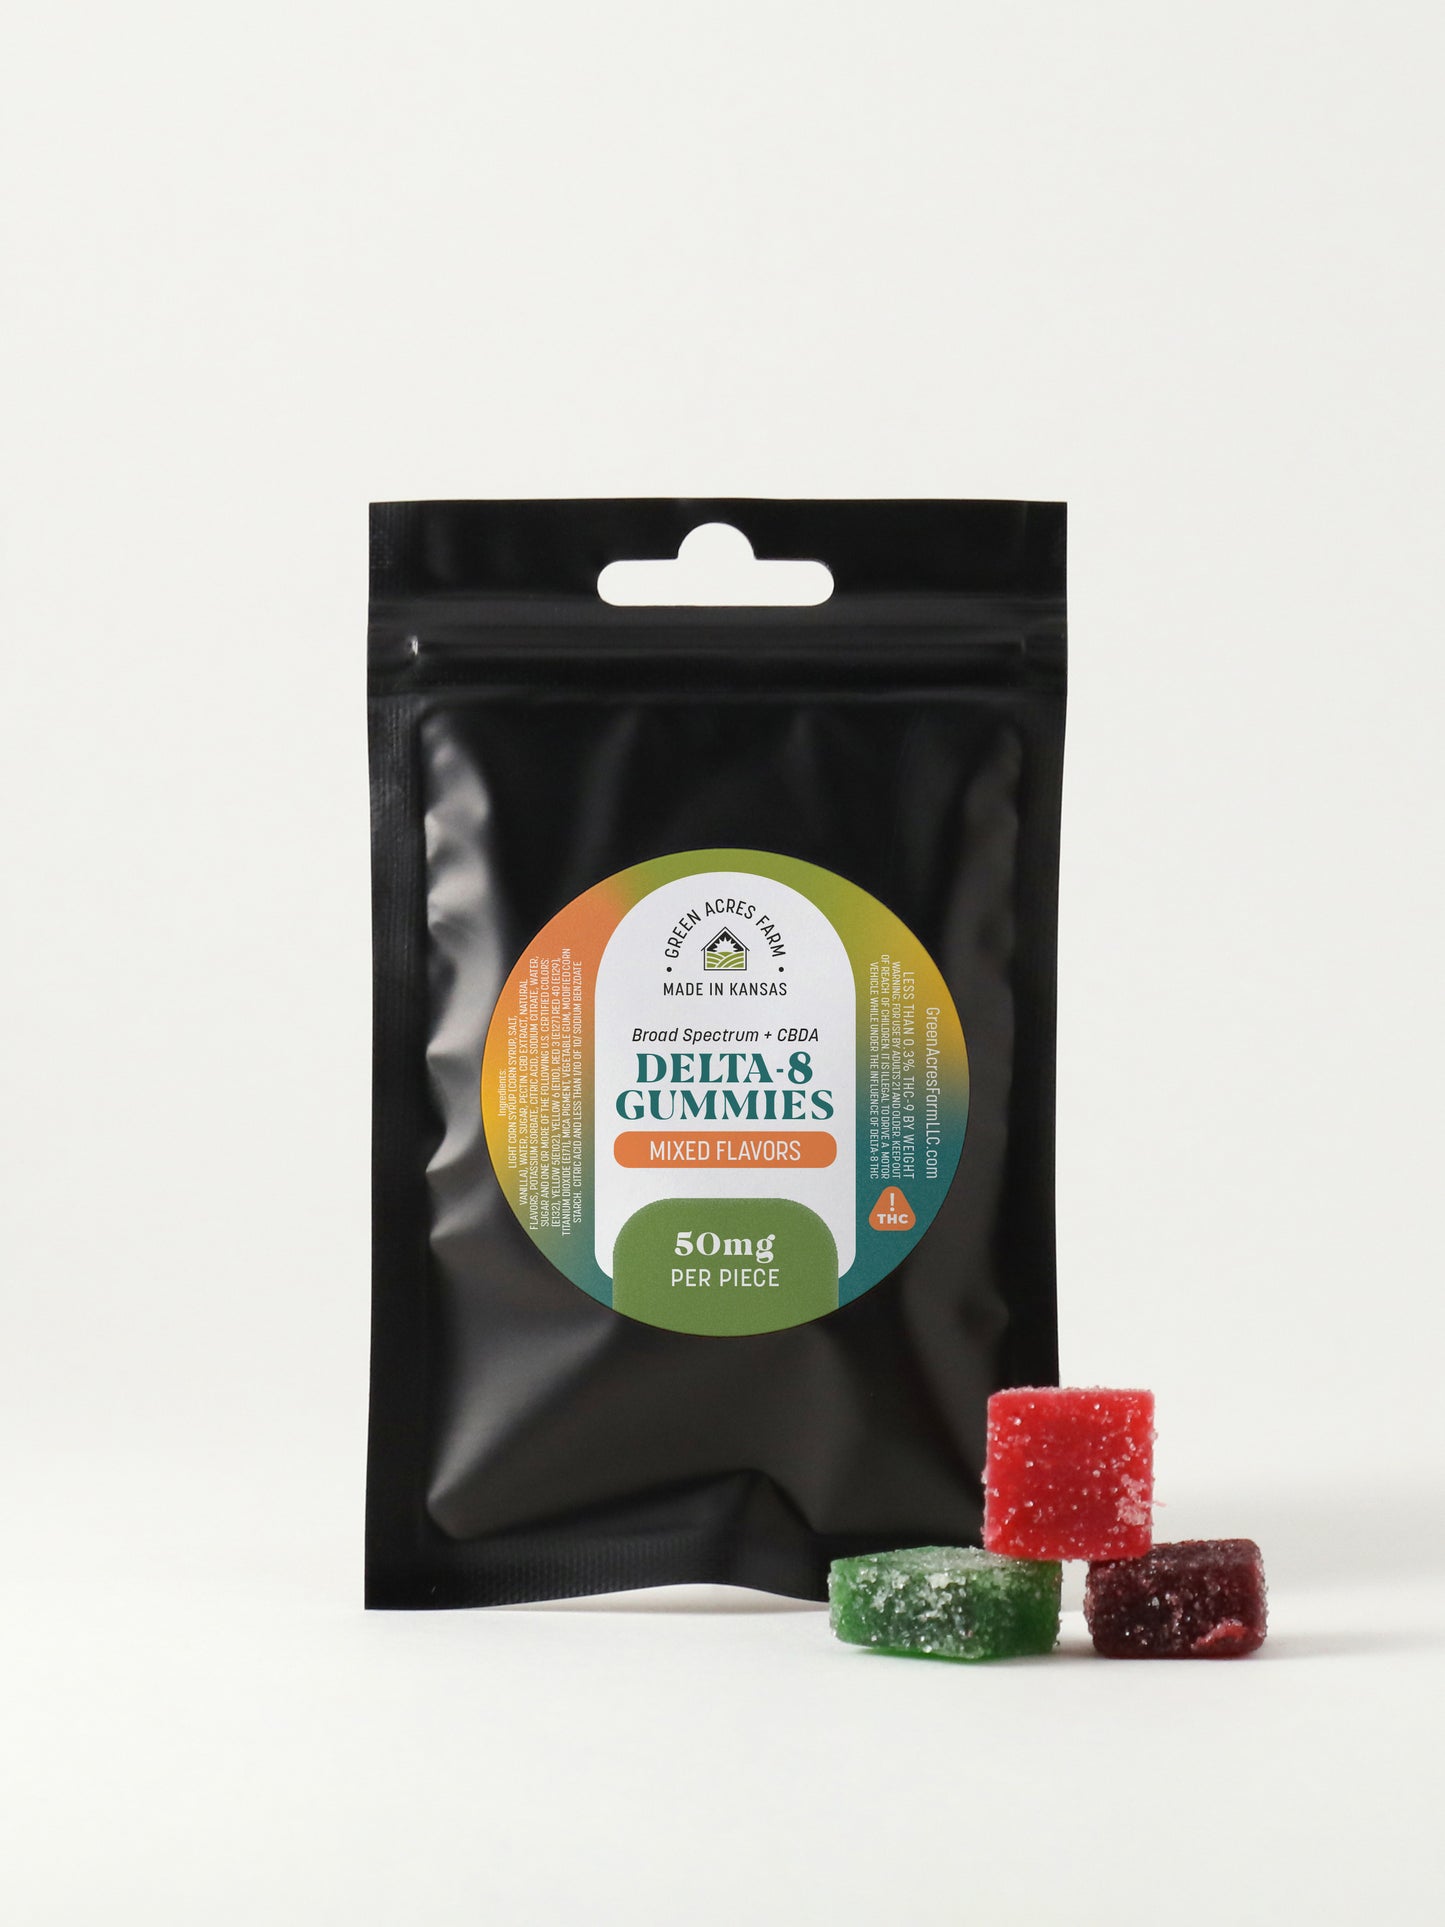 Delta-8 Gummies - Mixed Flavors Variety Pack (50mg)